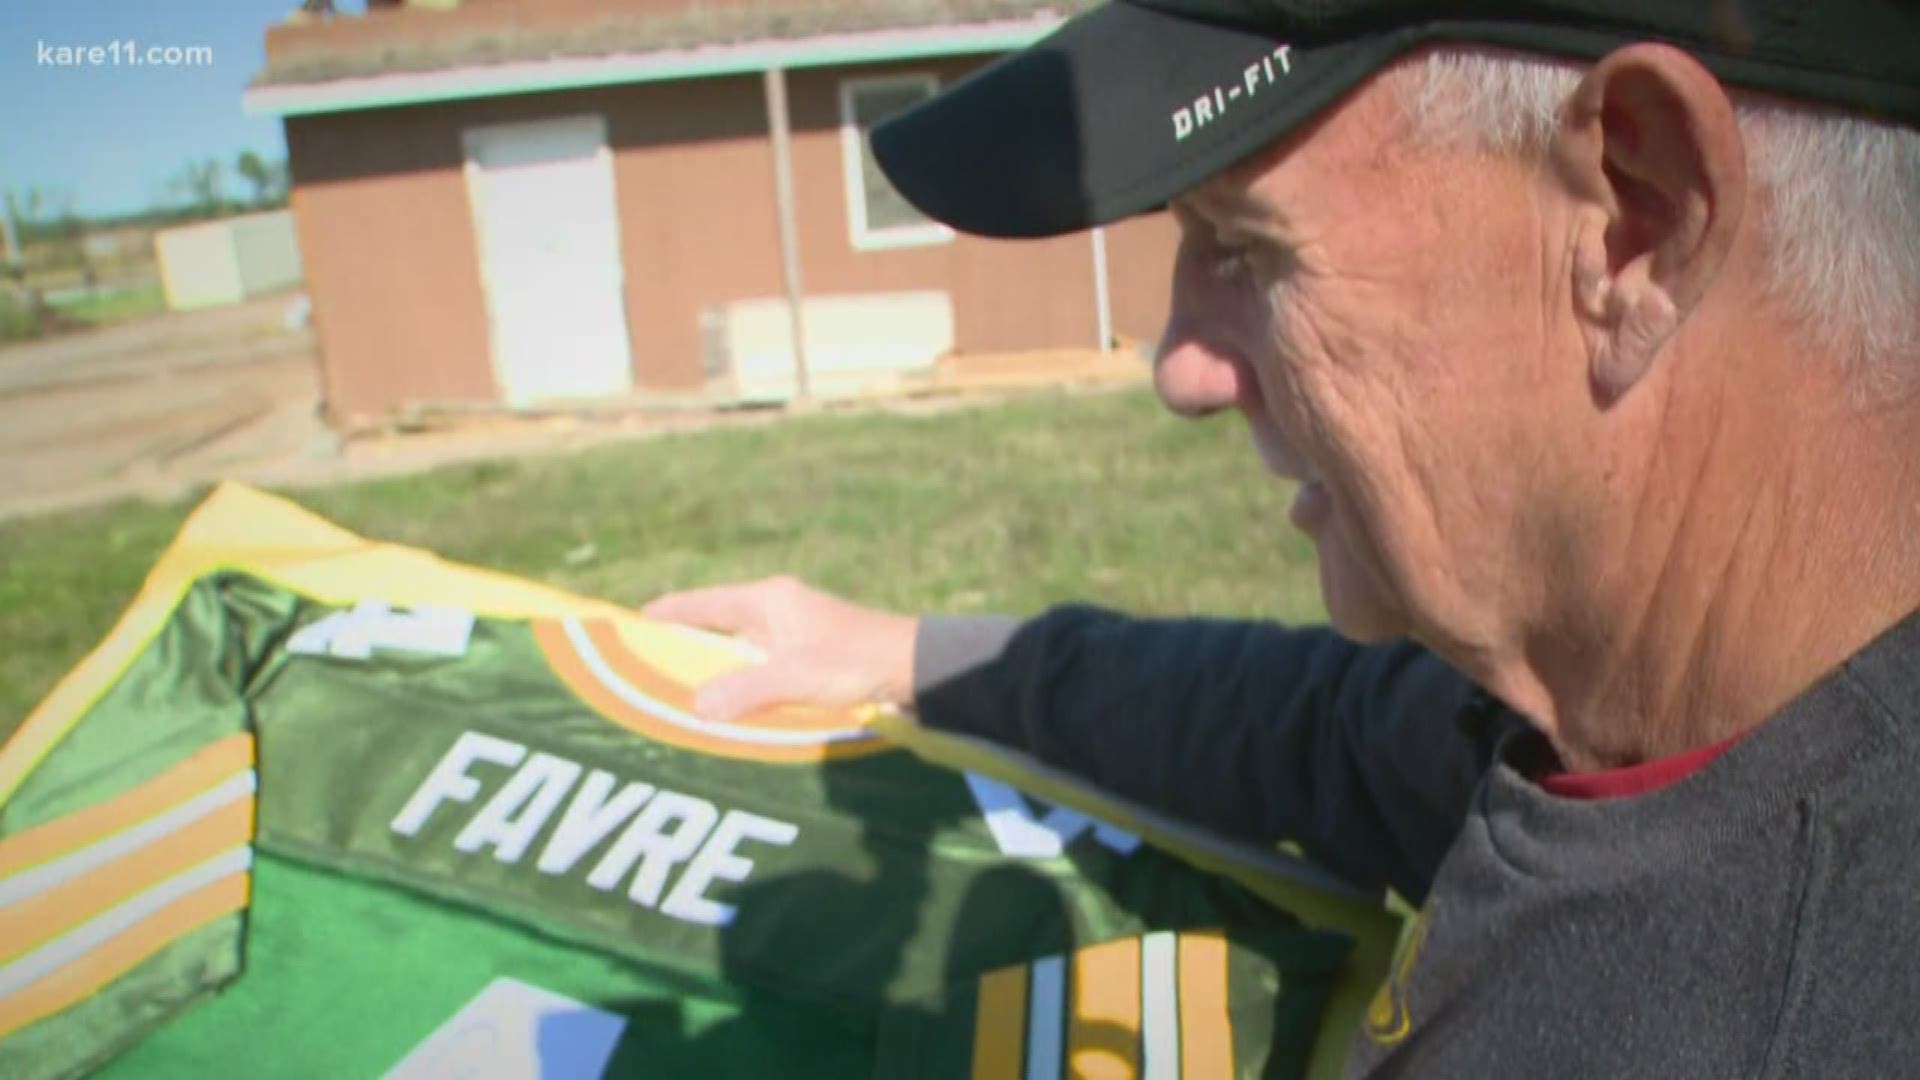 Malcom Gullickson lost many of his possessions, but his signed Brett Favre Packers jersey was recovered and will once again hang on his wall.